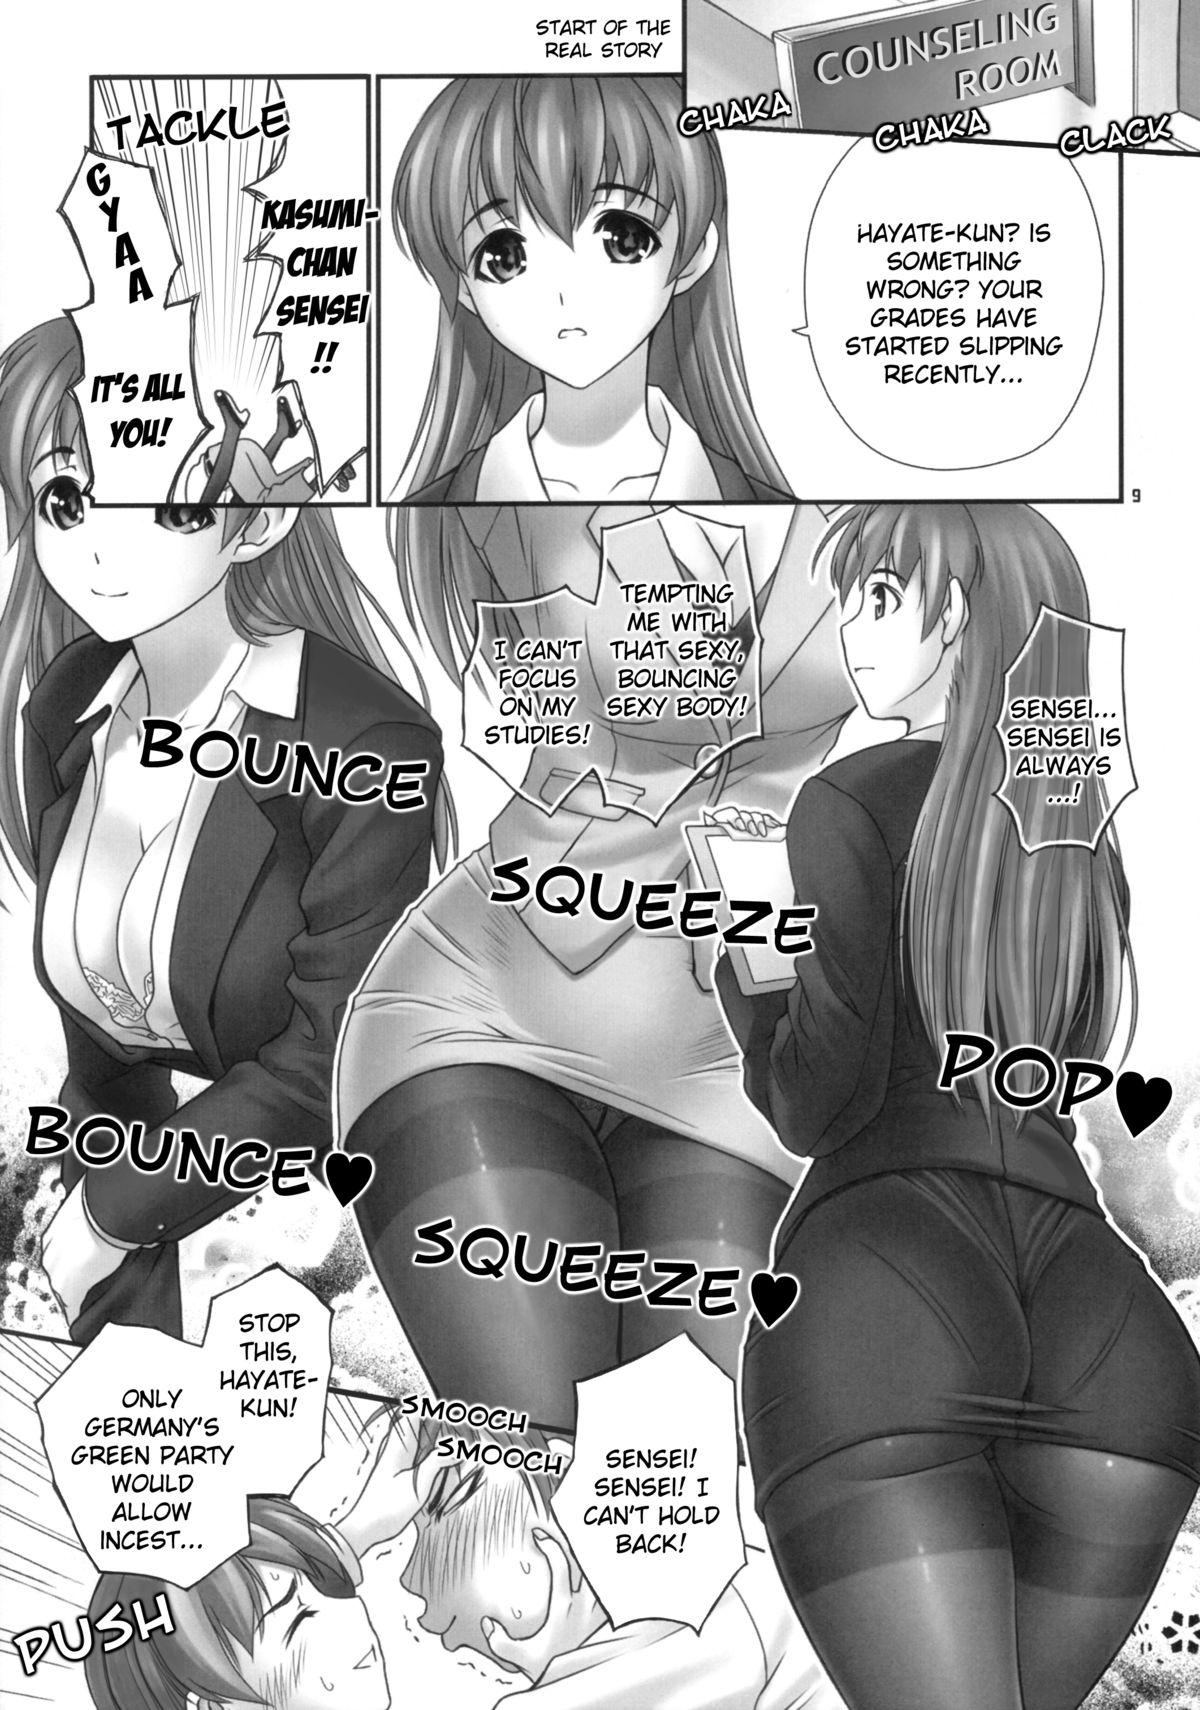 Interview St. Dead or Alive Highschool - Love Love Kasumi Chan Teacher - Dead or alive Asslicking - Page 8